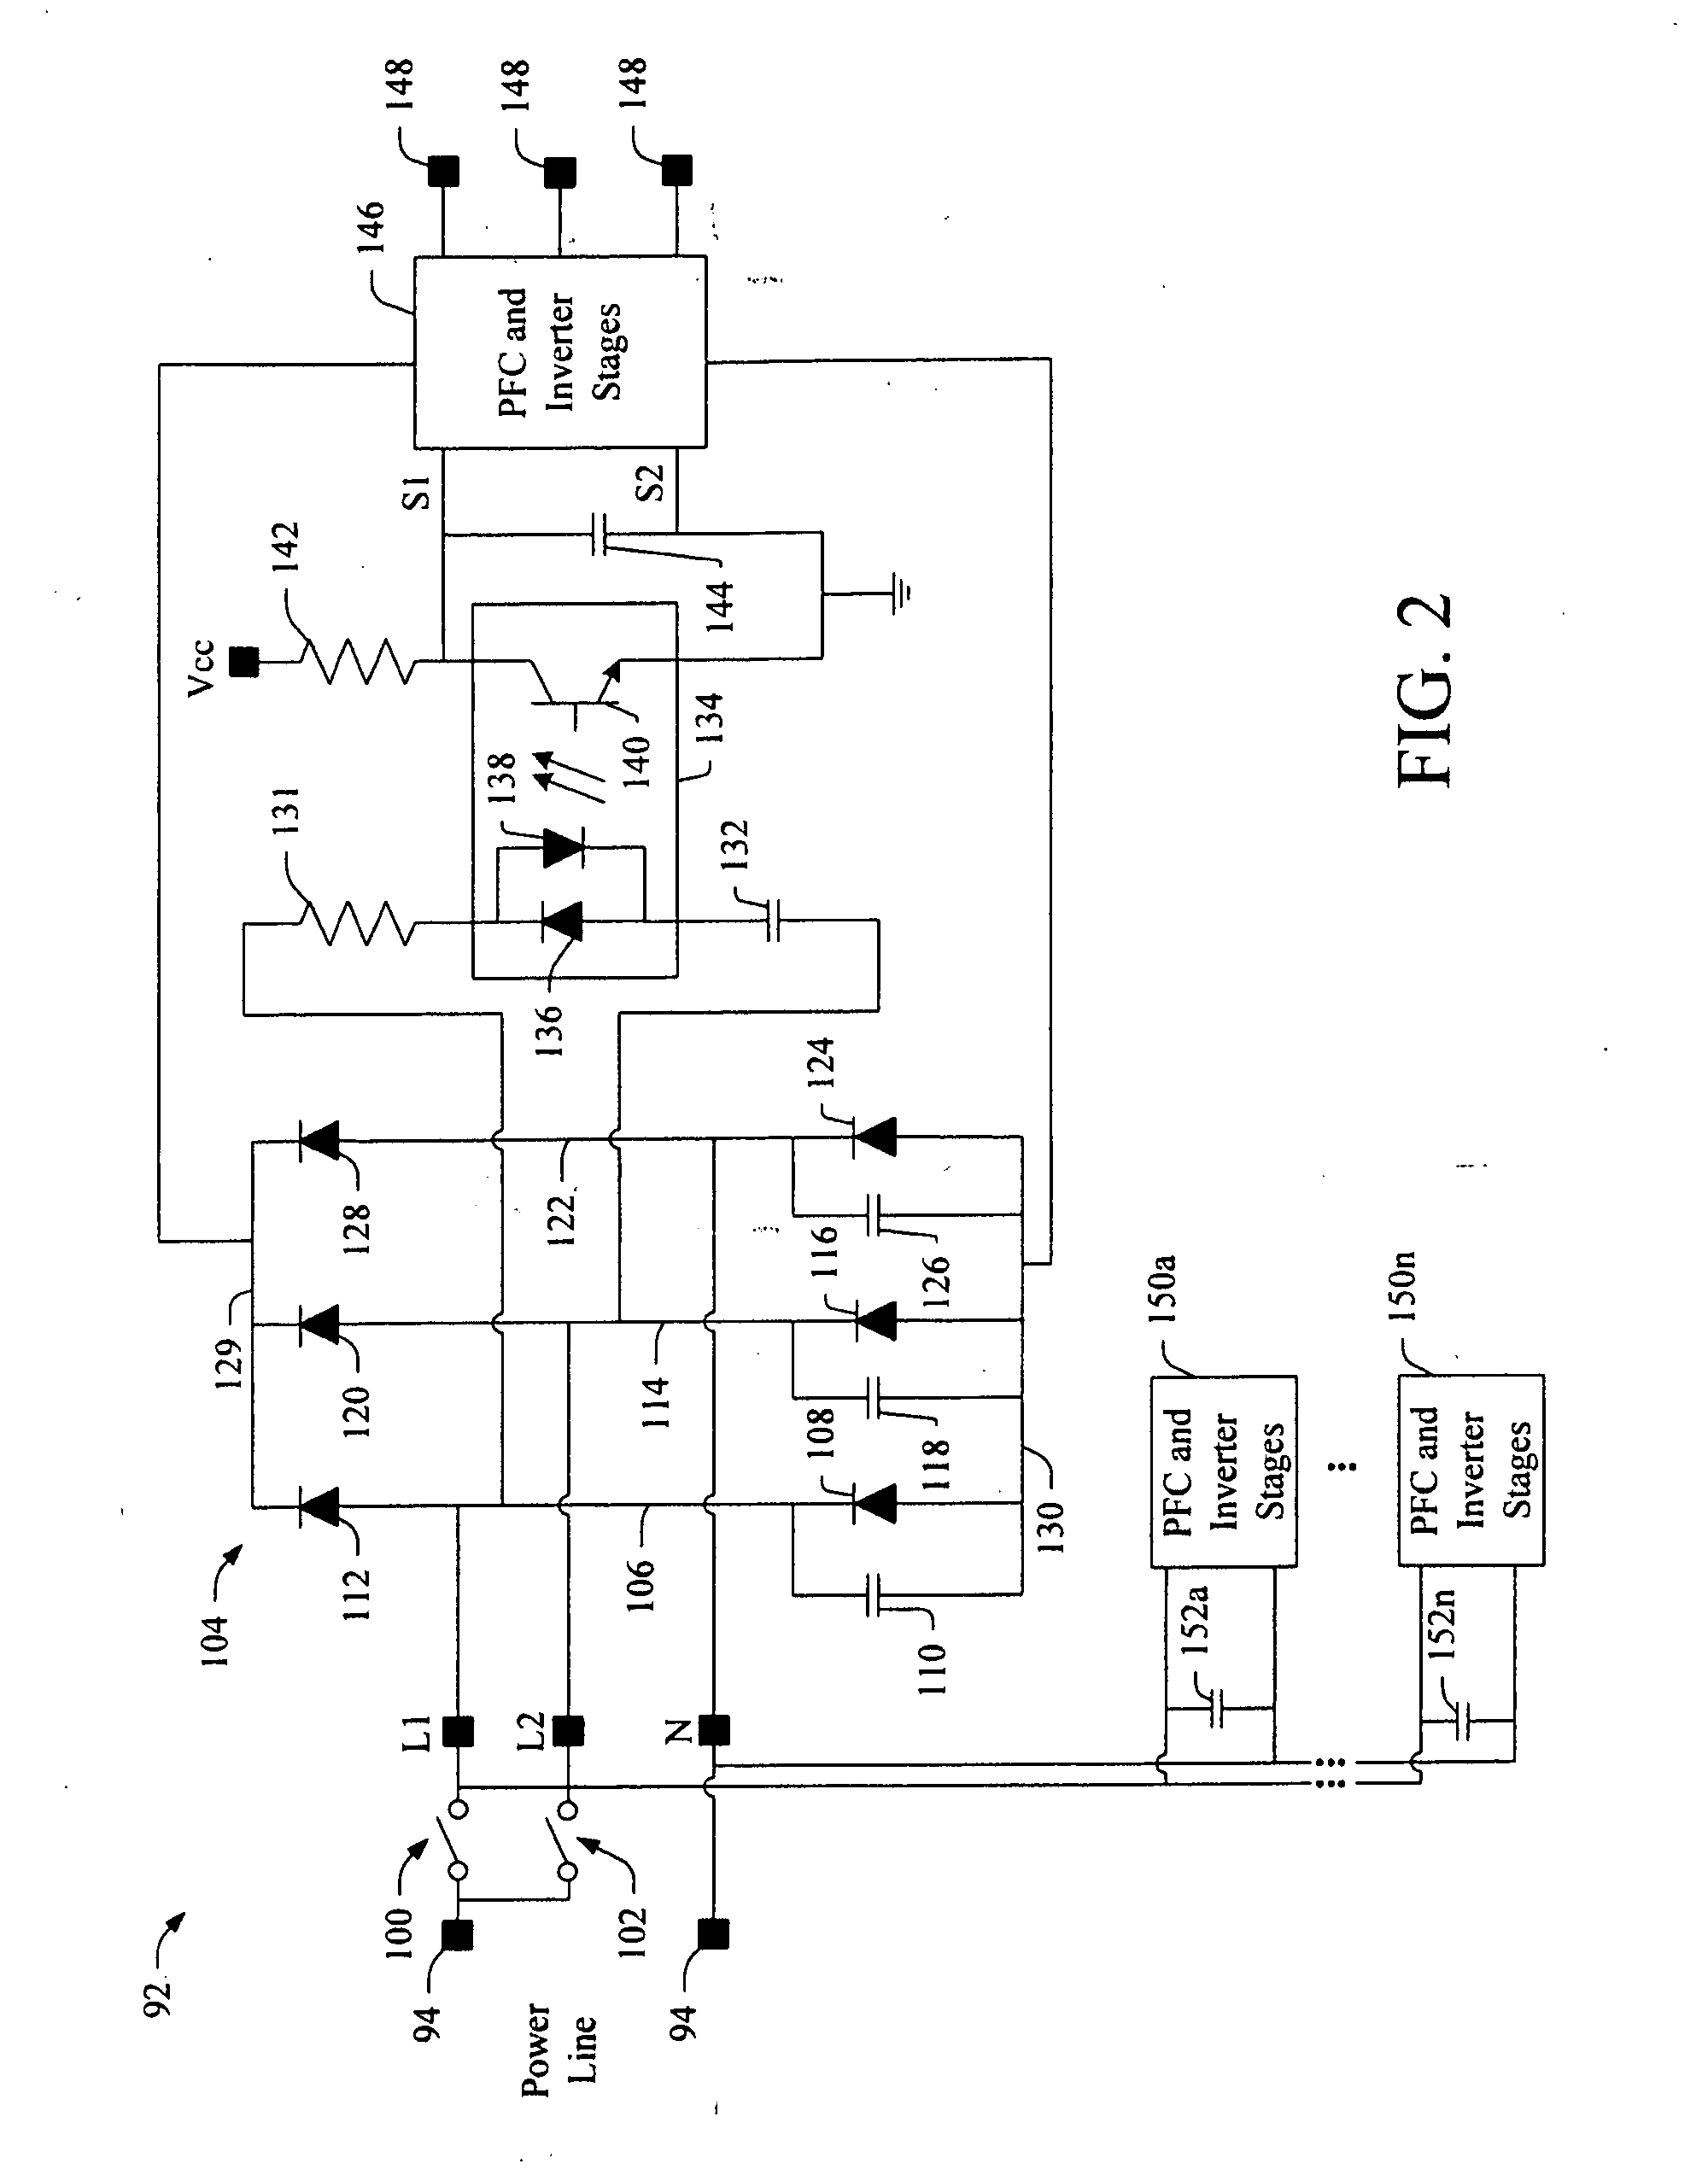 Dimming interface for power line